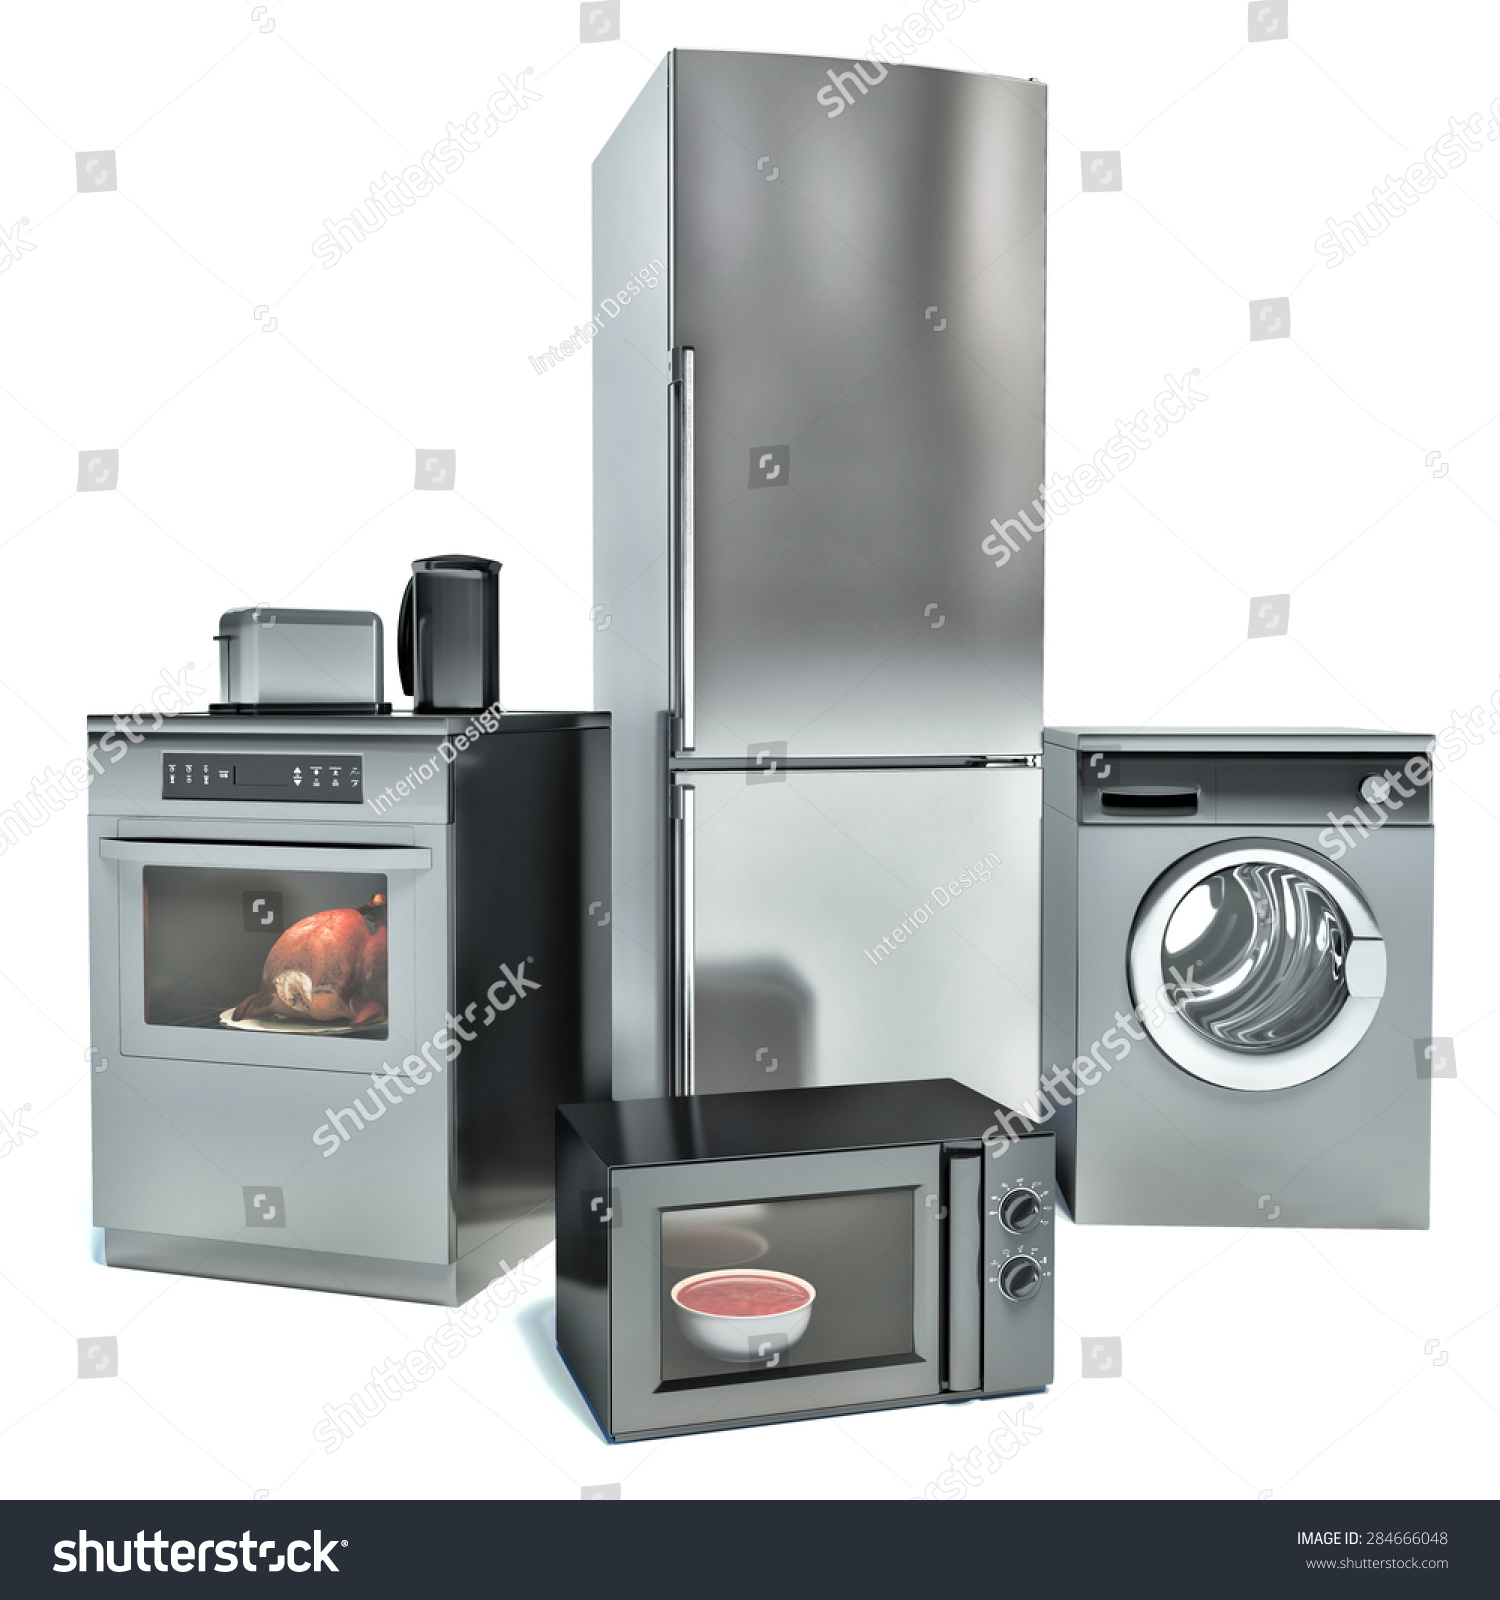 Home Appliances Isolated On White. Fridge, Gas Cooker, Microwave Oven ...